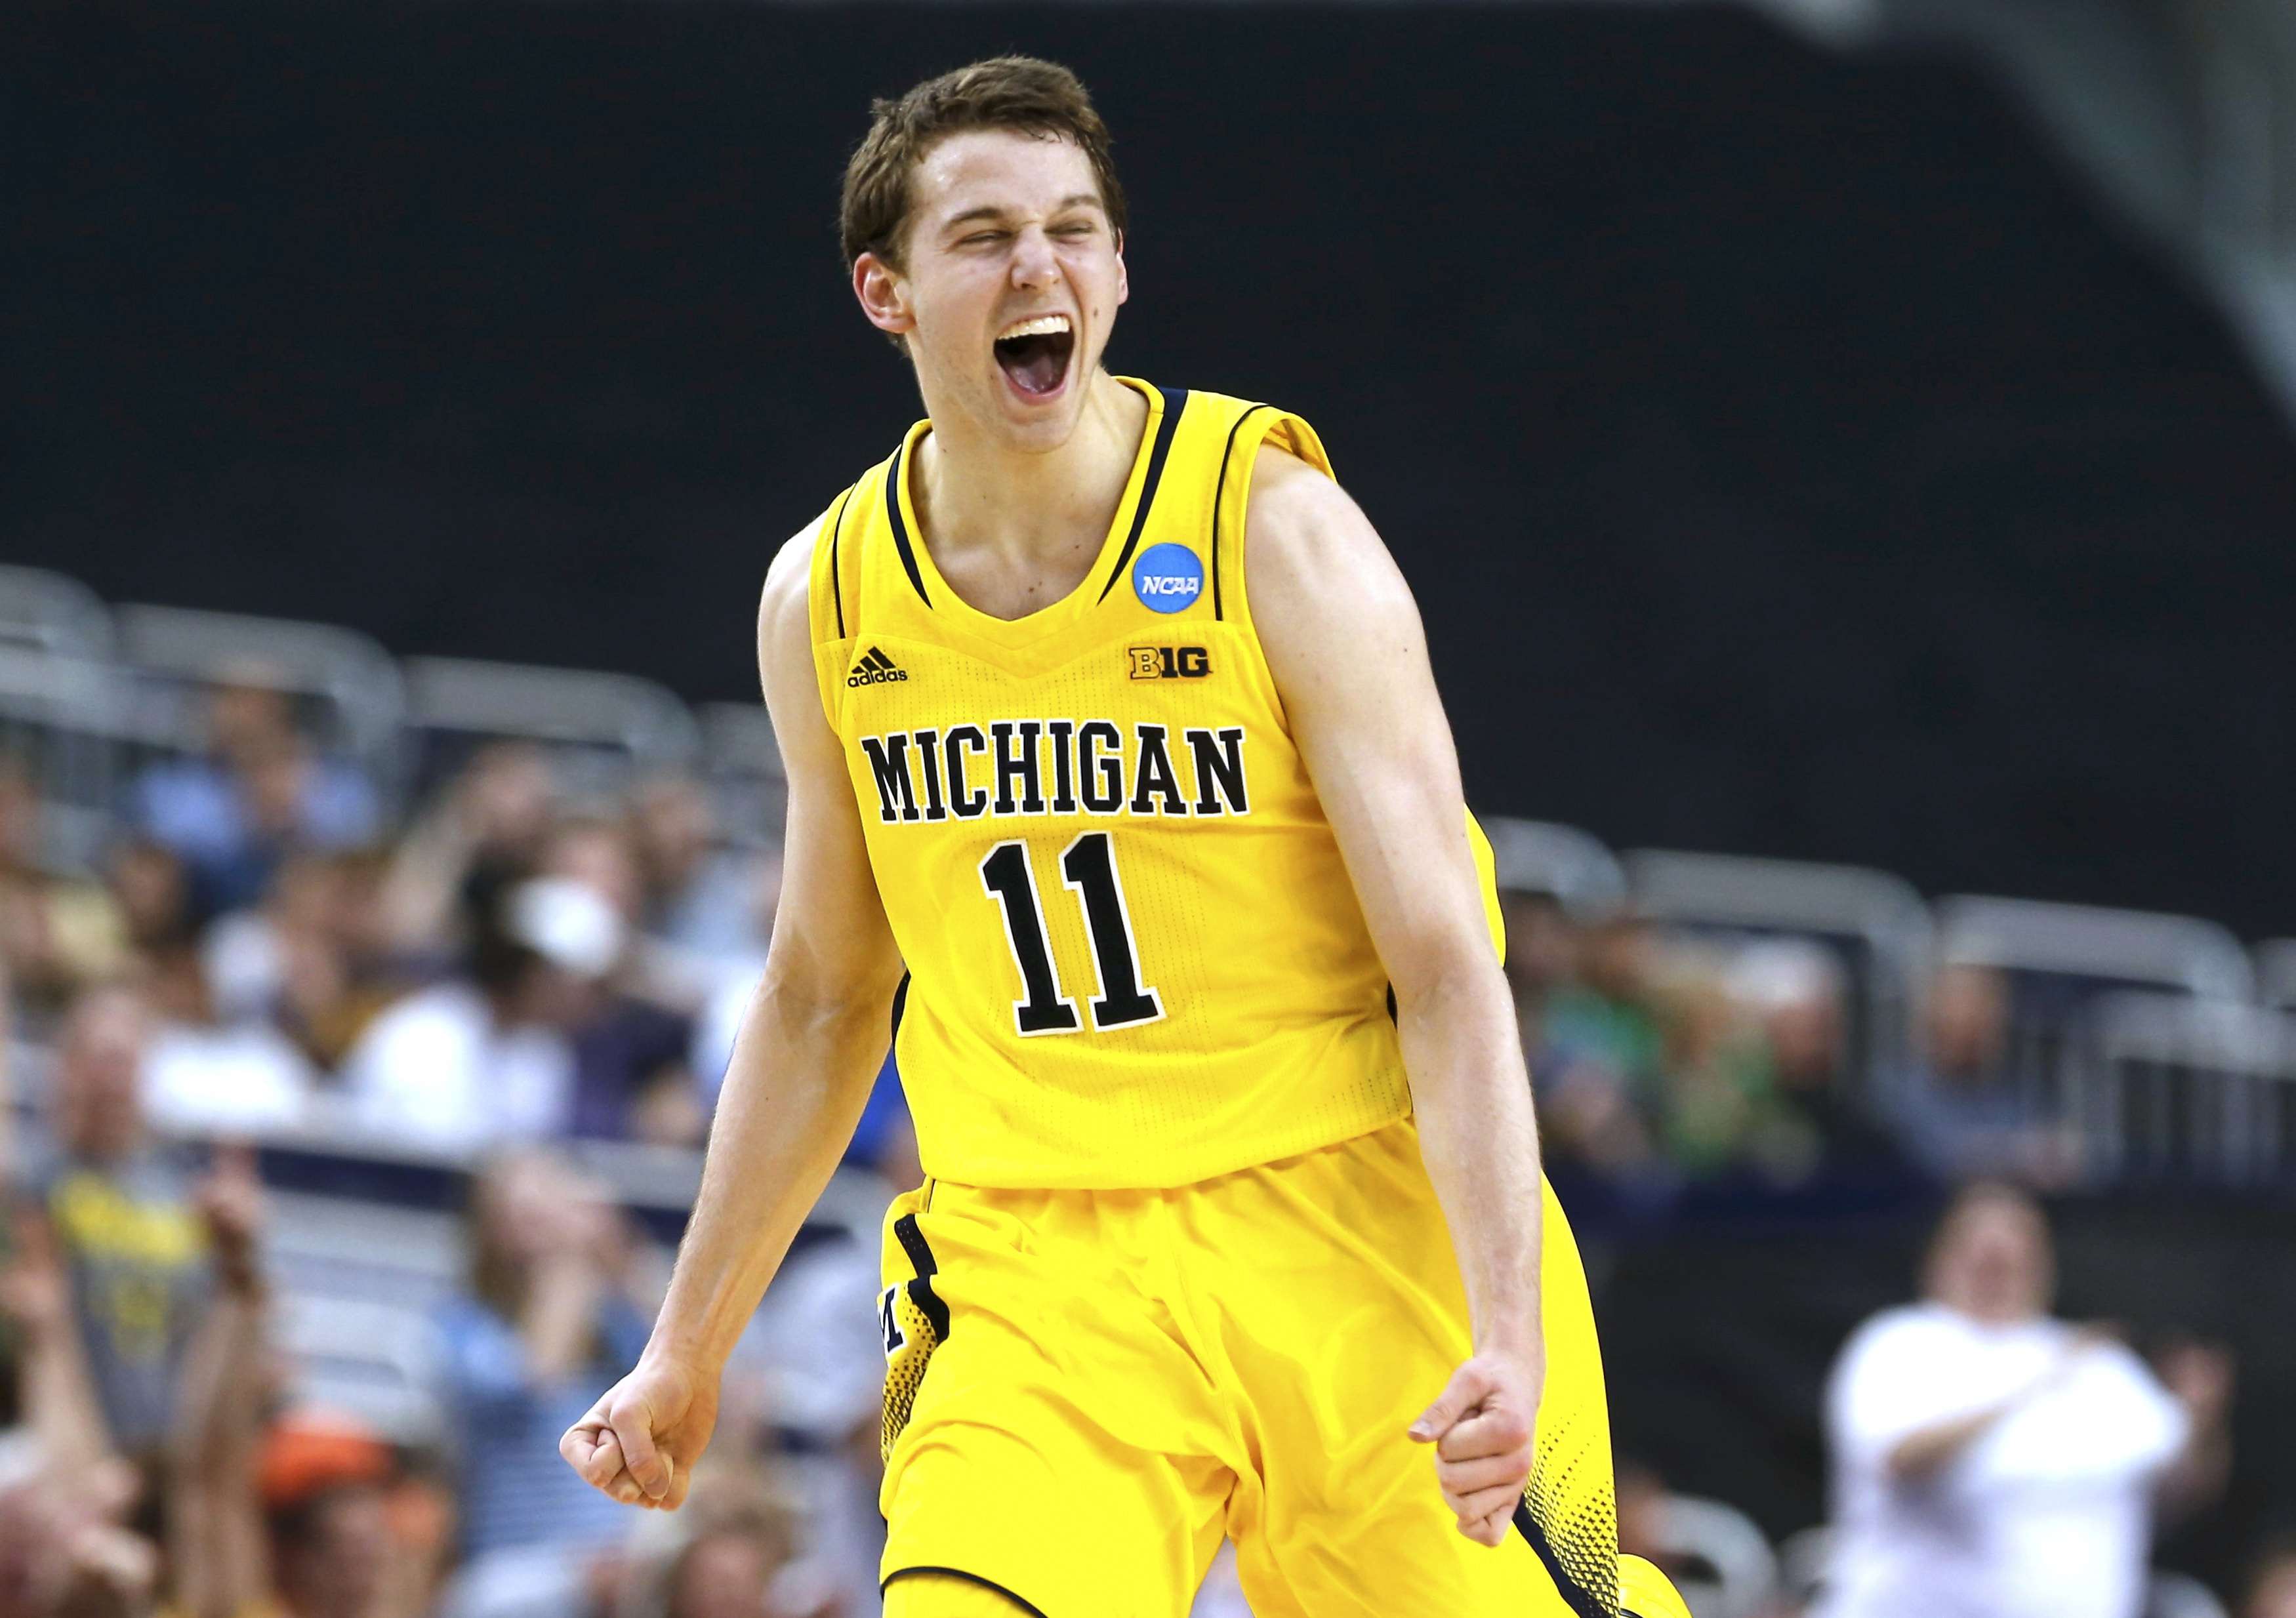 4 things to know about new Celtics shooter Nik Stauskas